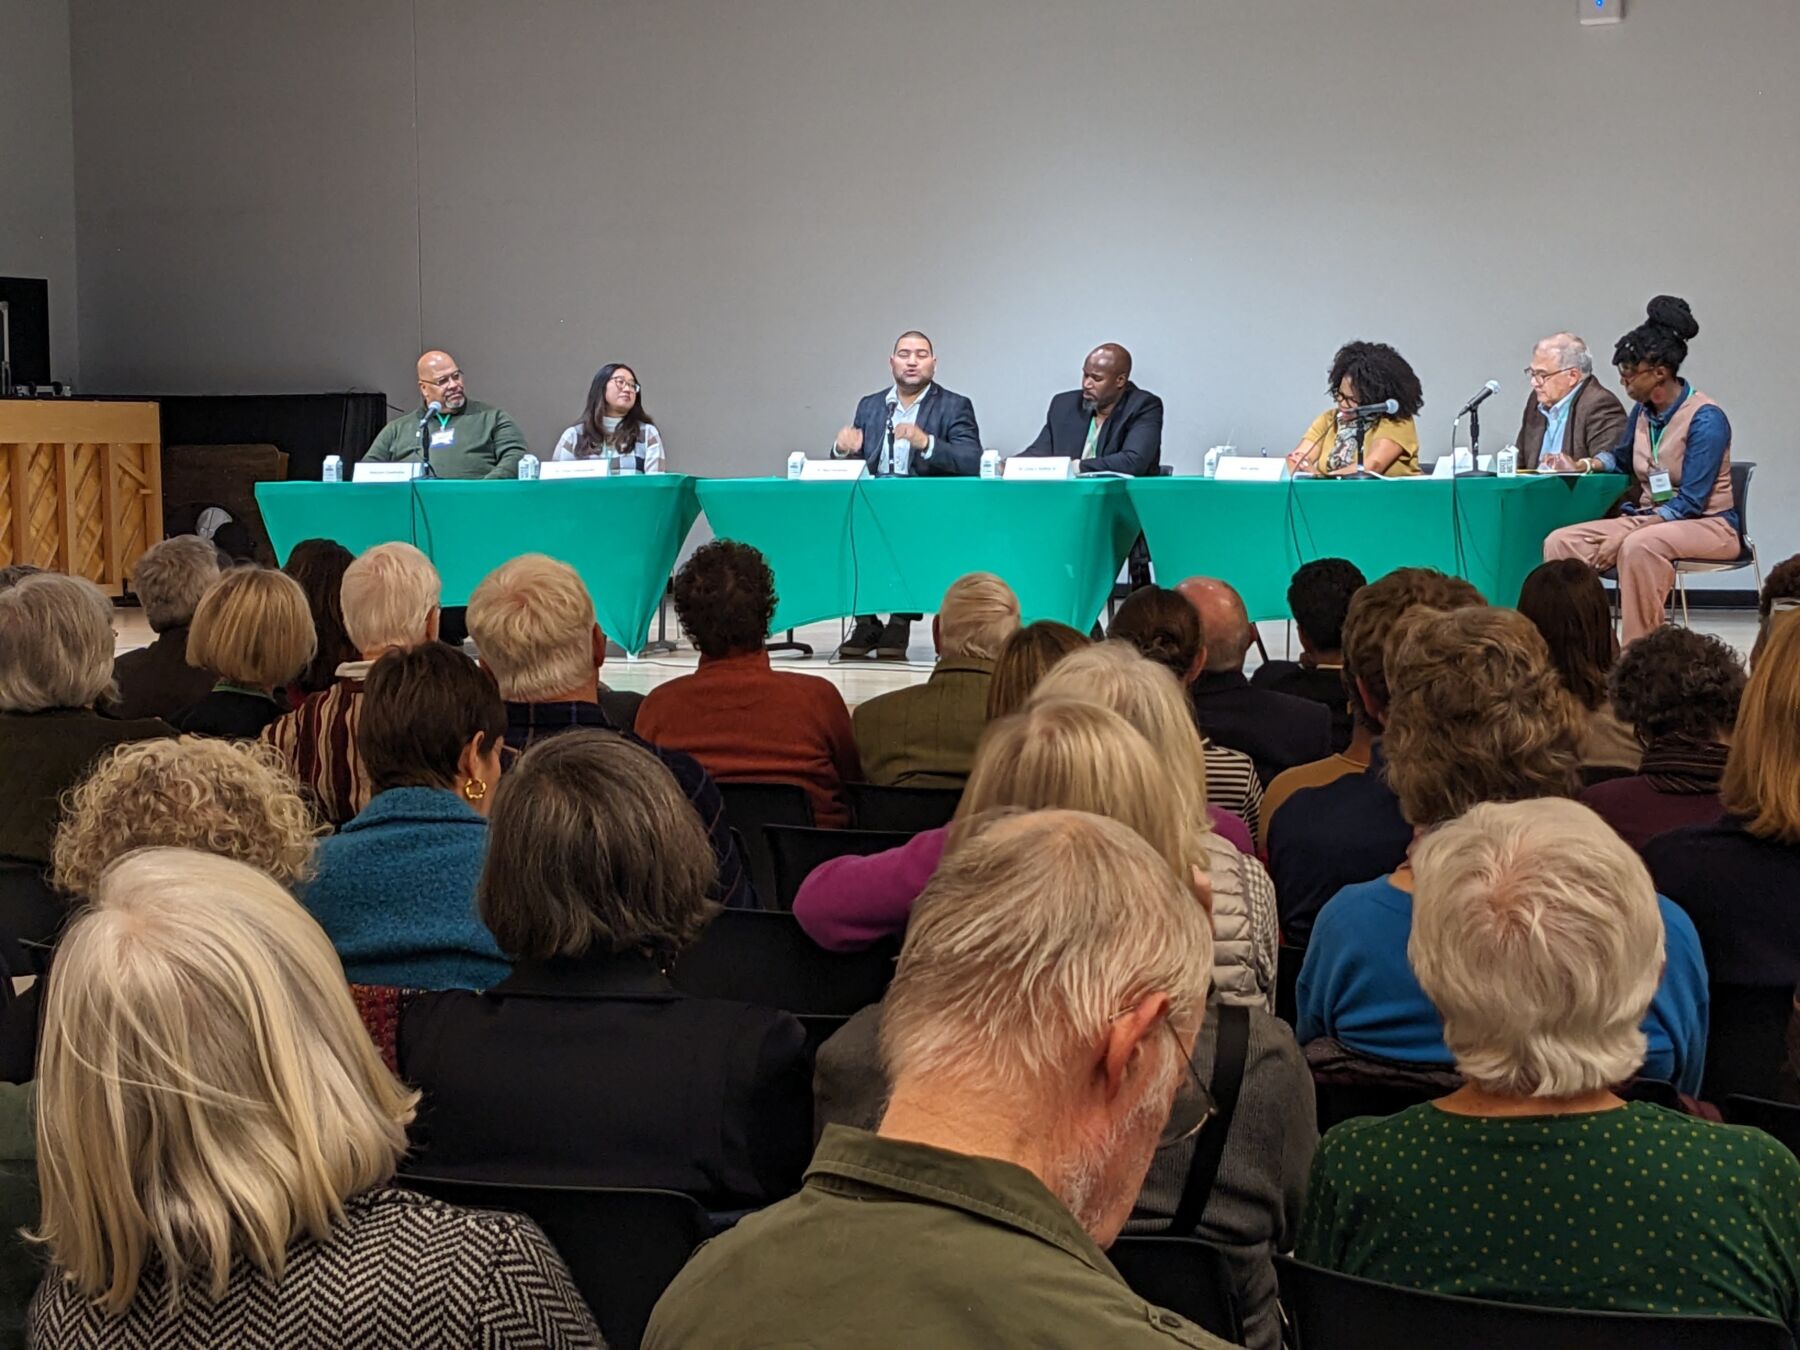 A crowd of people watches a panel discussion in an auditorium. The panelists are sitting side-by-side at a long table with a bright green tablecloth. They are engaged in conversation and eagerly sharing ideas.